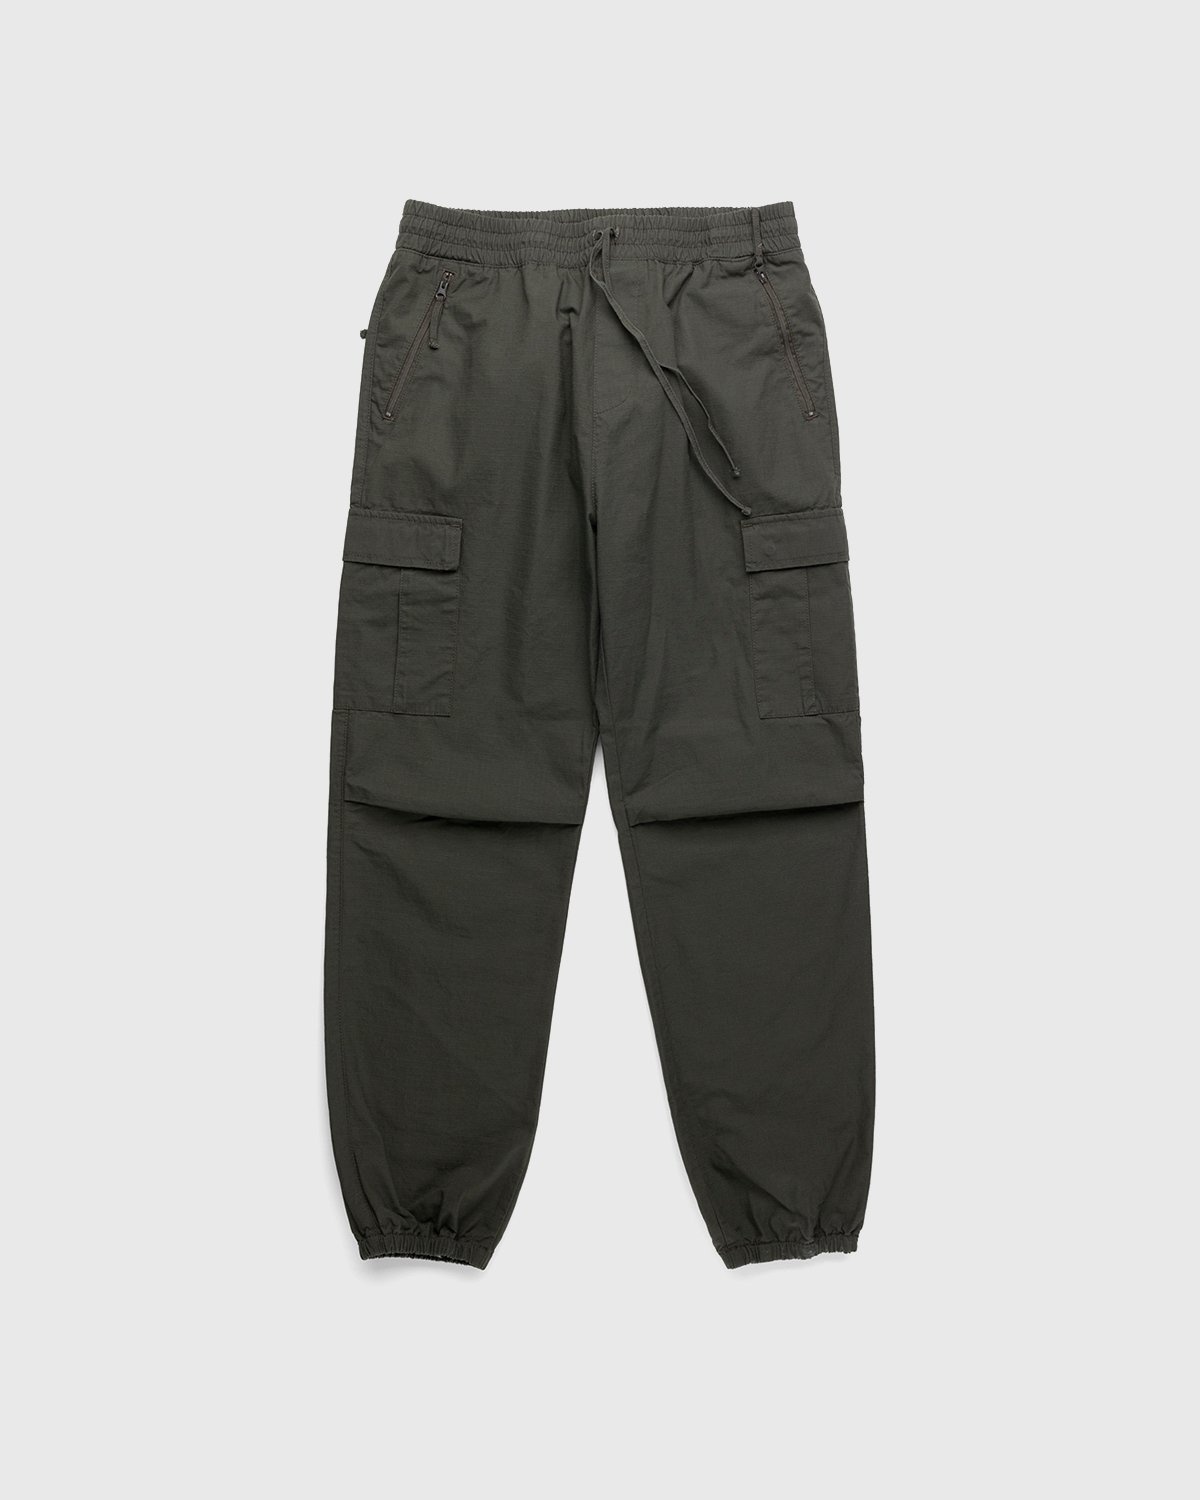 Carhartt WIP – Cargo Jogger Cypress Rinsed - Cargo Pants - Green - Image 1